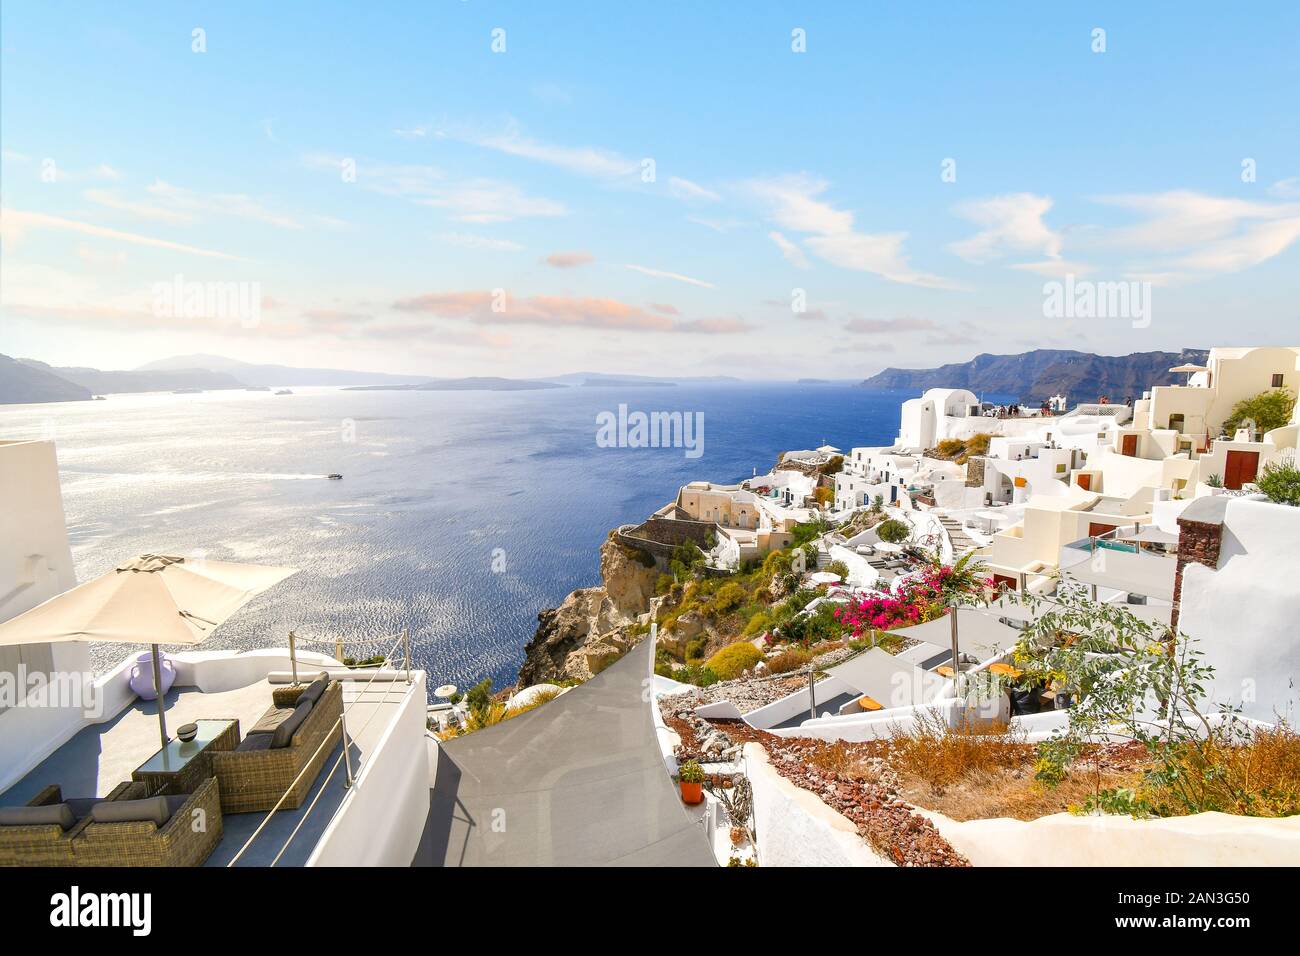 A terrace overlooks the whitewashed town of Oia, Greece and blue Aegean sea on the island of Santorini, Greece. Stock Photo